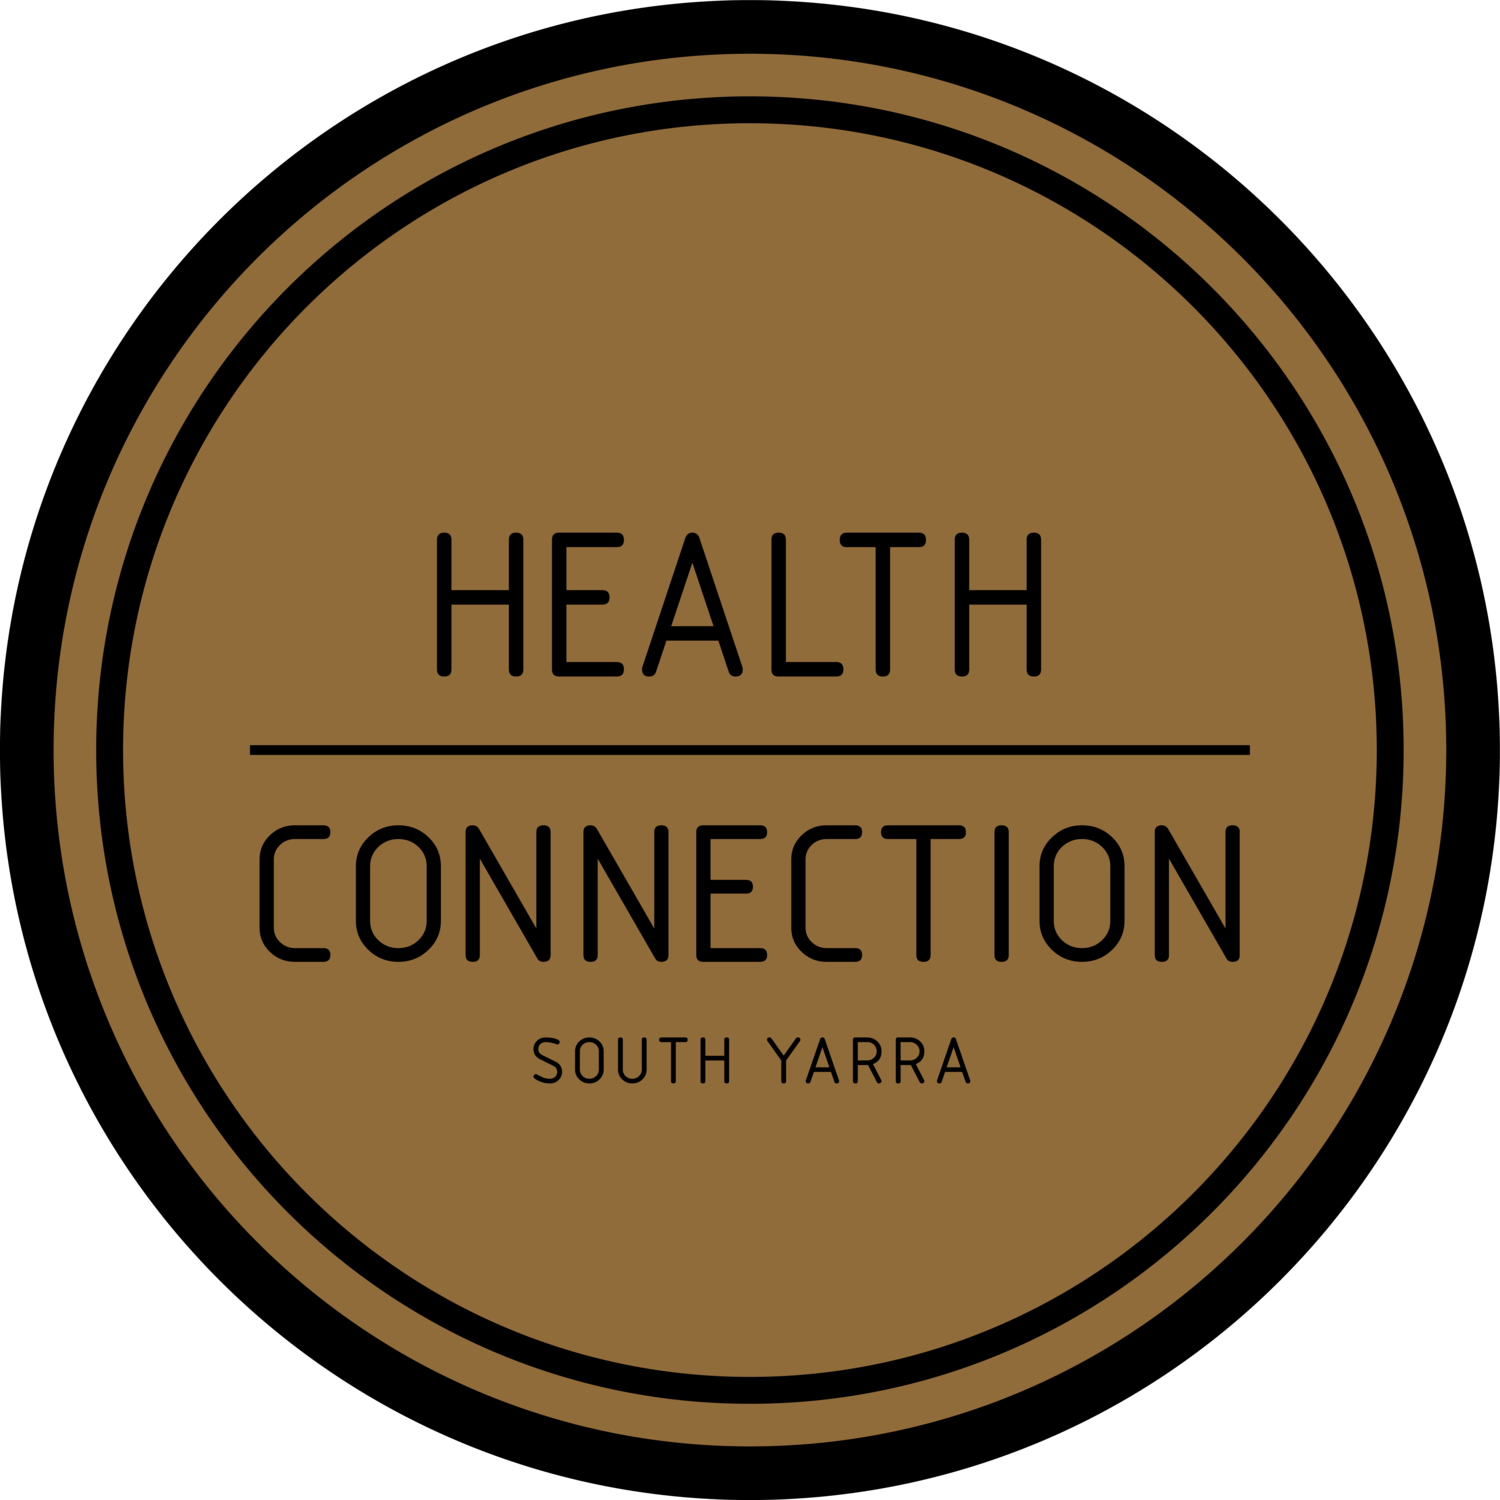 Health Connection South Yarra